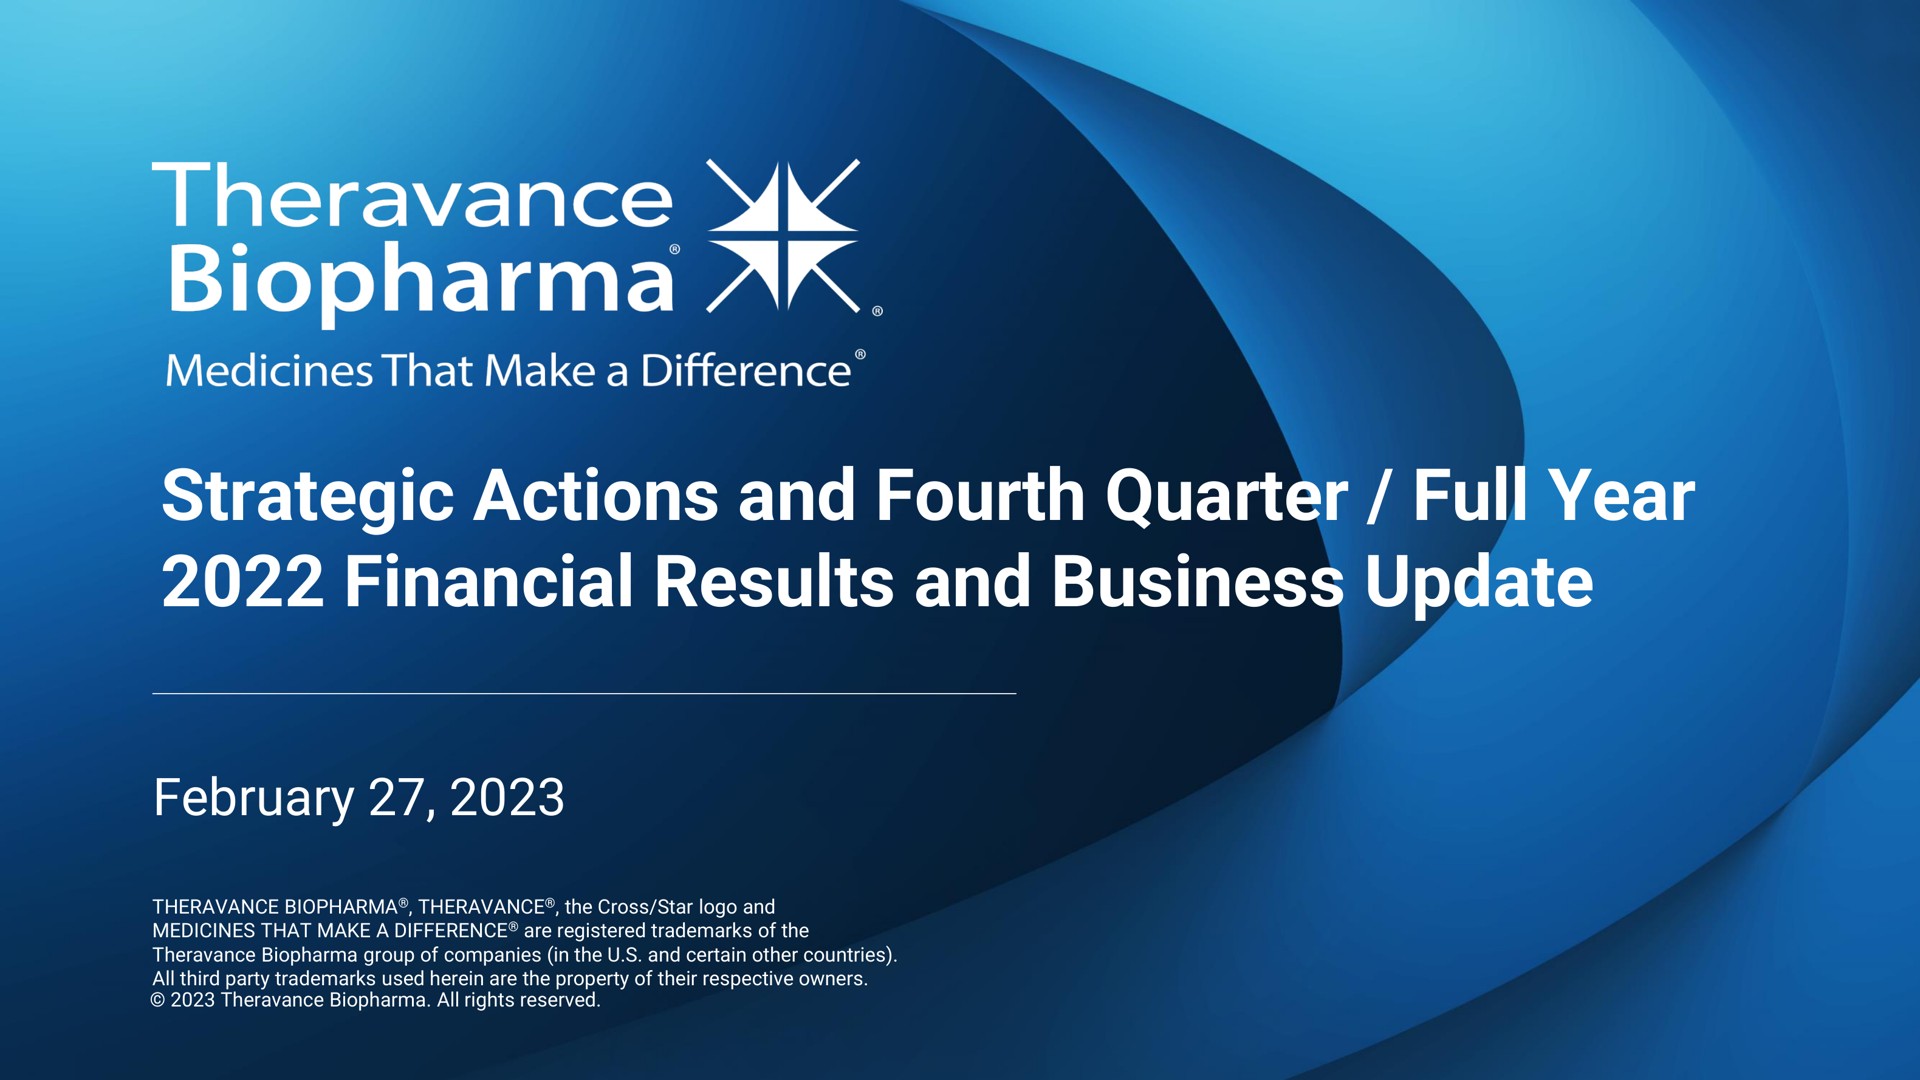 strategic actions and fourth quarter full year financial results and business update iva | Theravance Biopharma